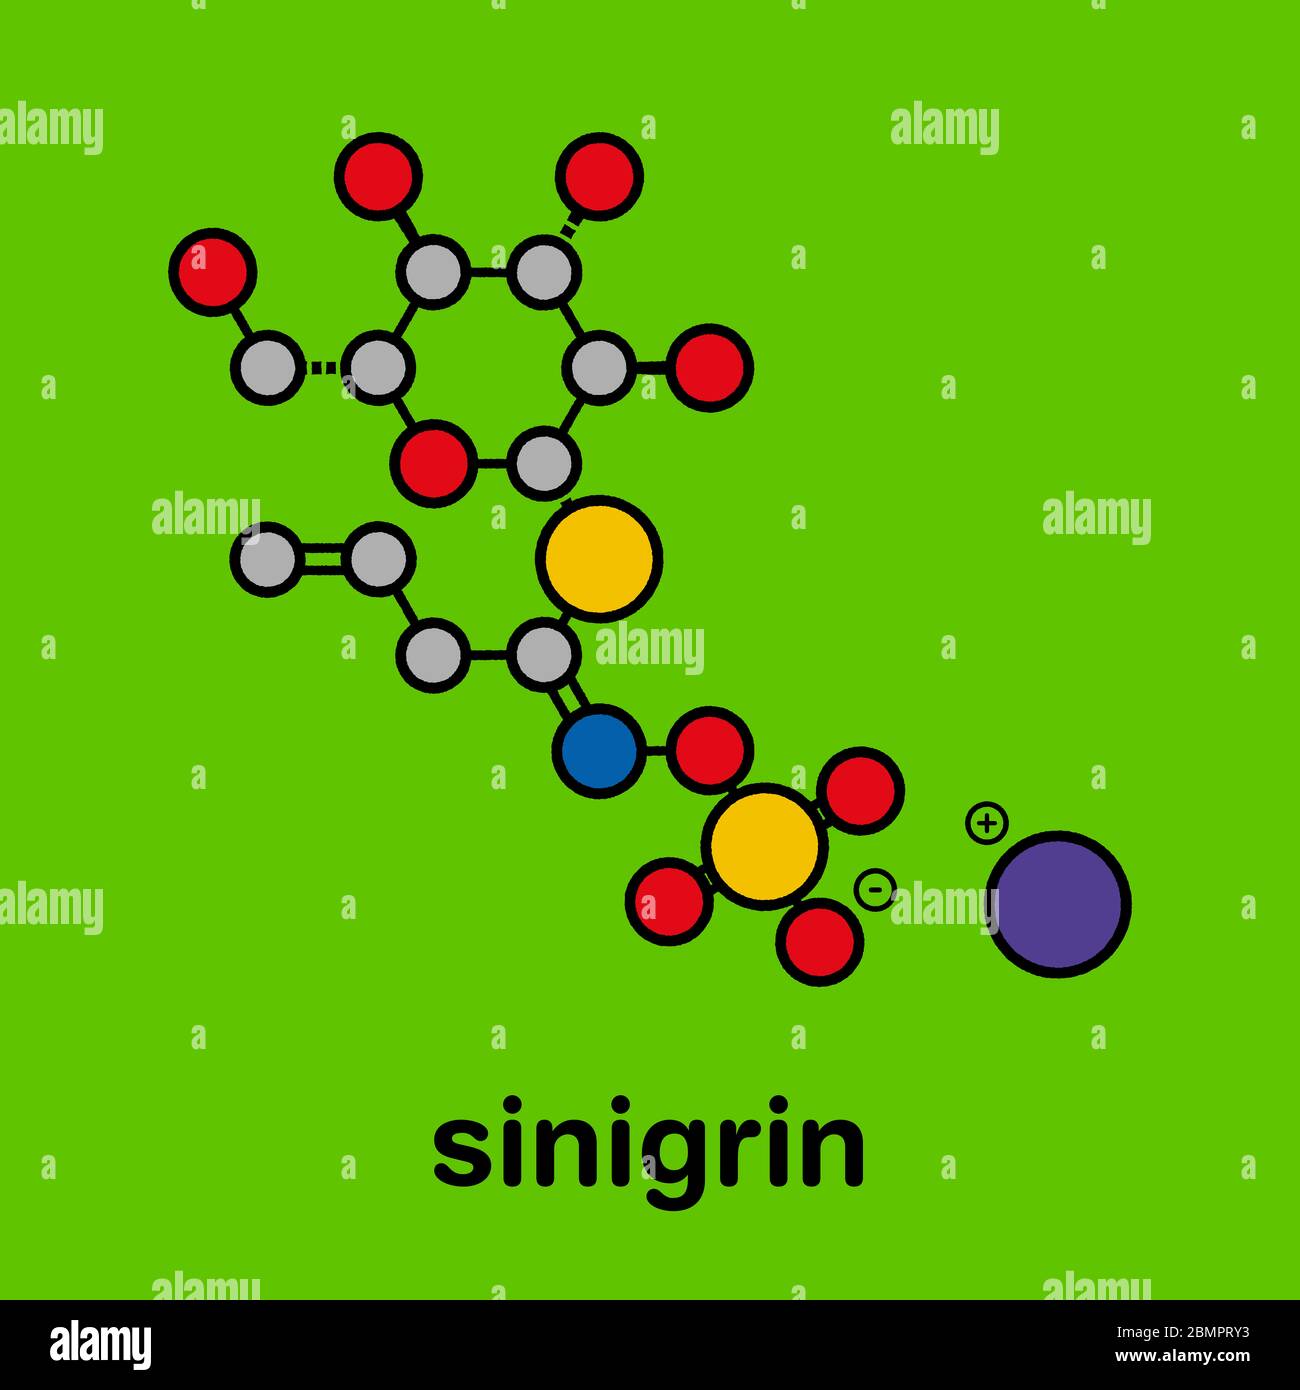 Sinigrin glucosinolate molecule. Present in some cruciferous vegetables (Brussels sprouts, broccoli, black mustard, etc). Stylized skeletal formula (chemical structure): Atoms are shown as color-coded circles: hydrogen (hidden), carbon (grey), oxygen (red), nitrogen (blue), sulfur (yellow). Stock Photo